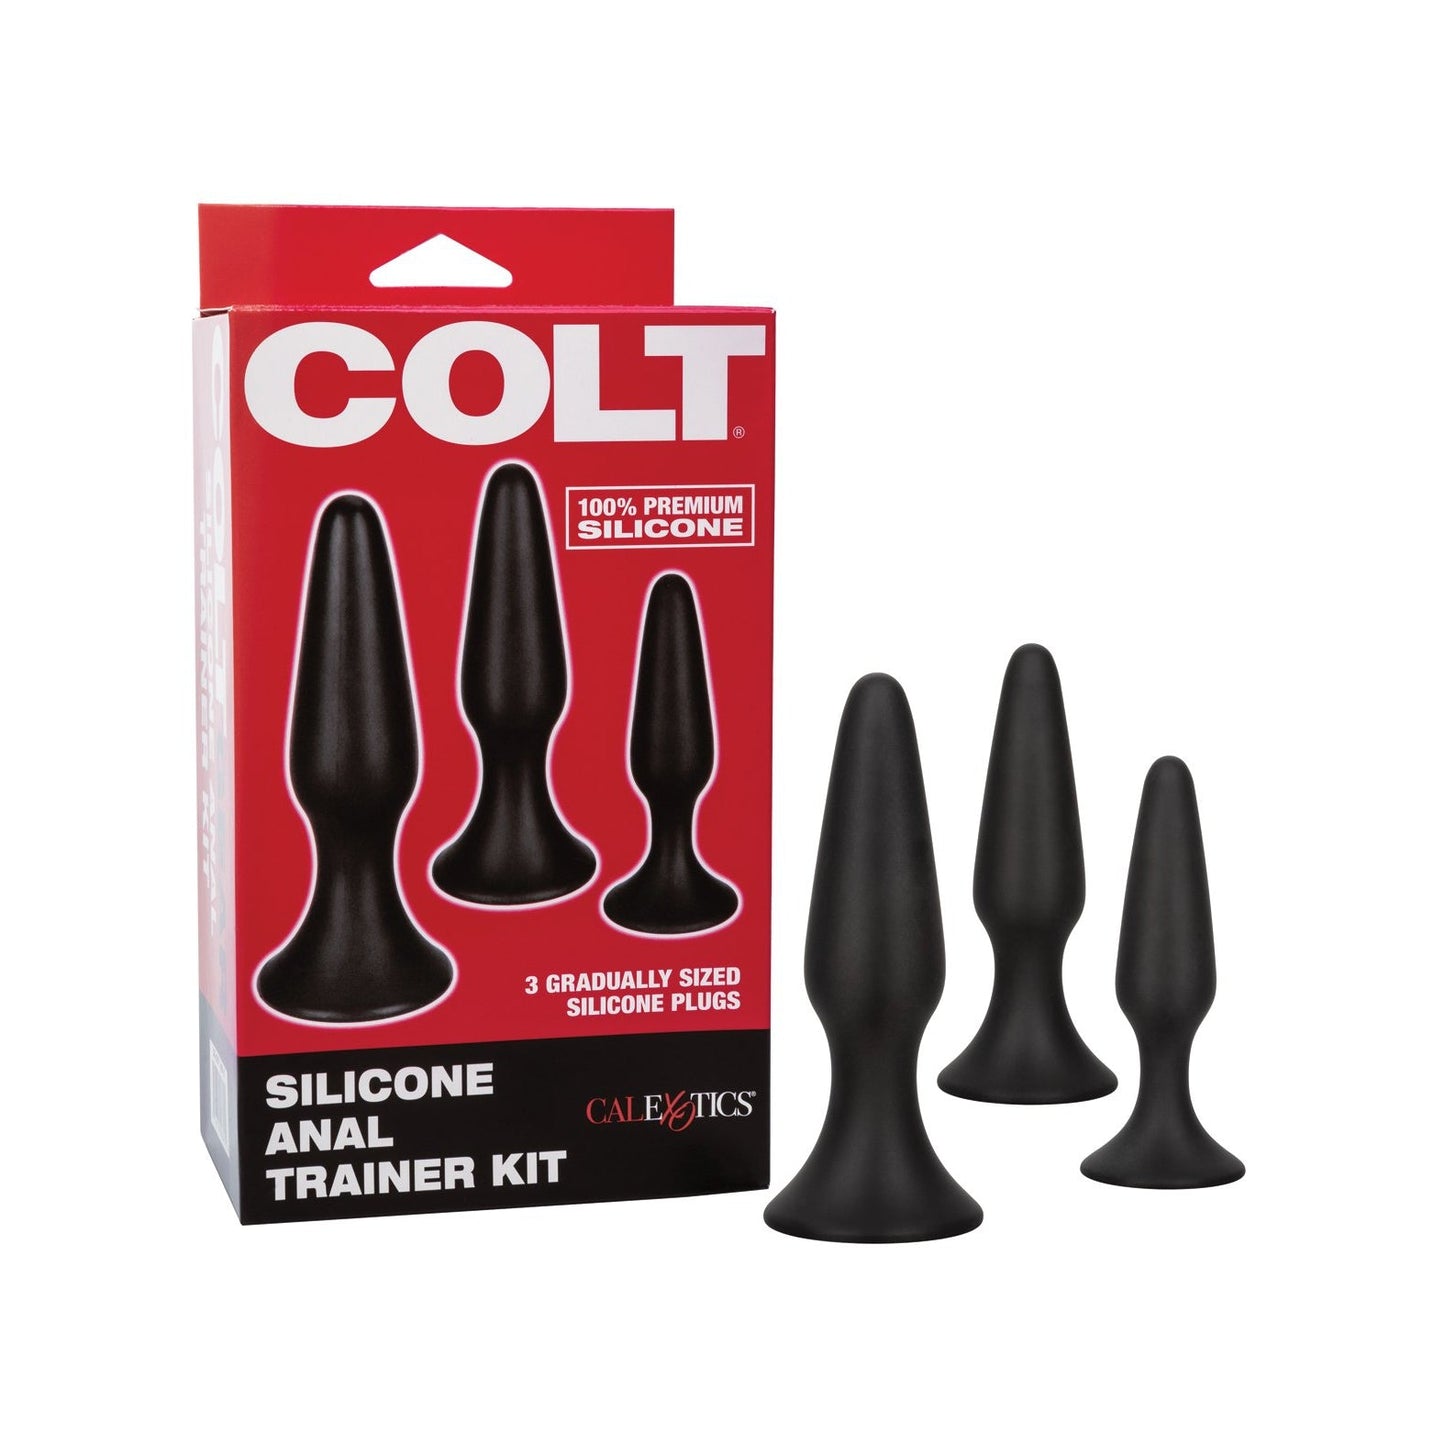 COLT Silicone Anal Trainer Kit